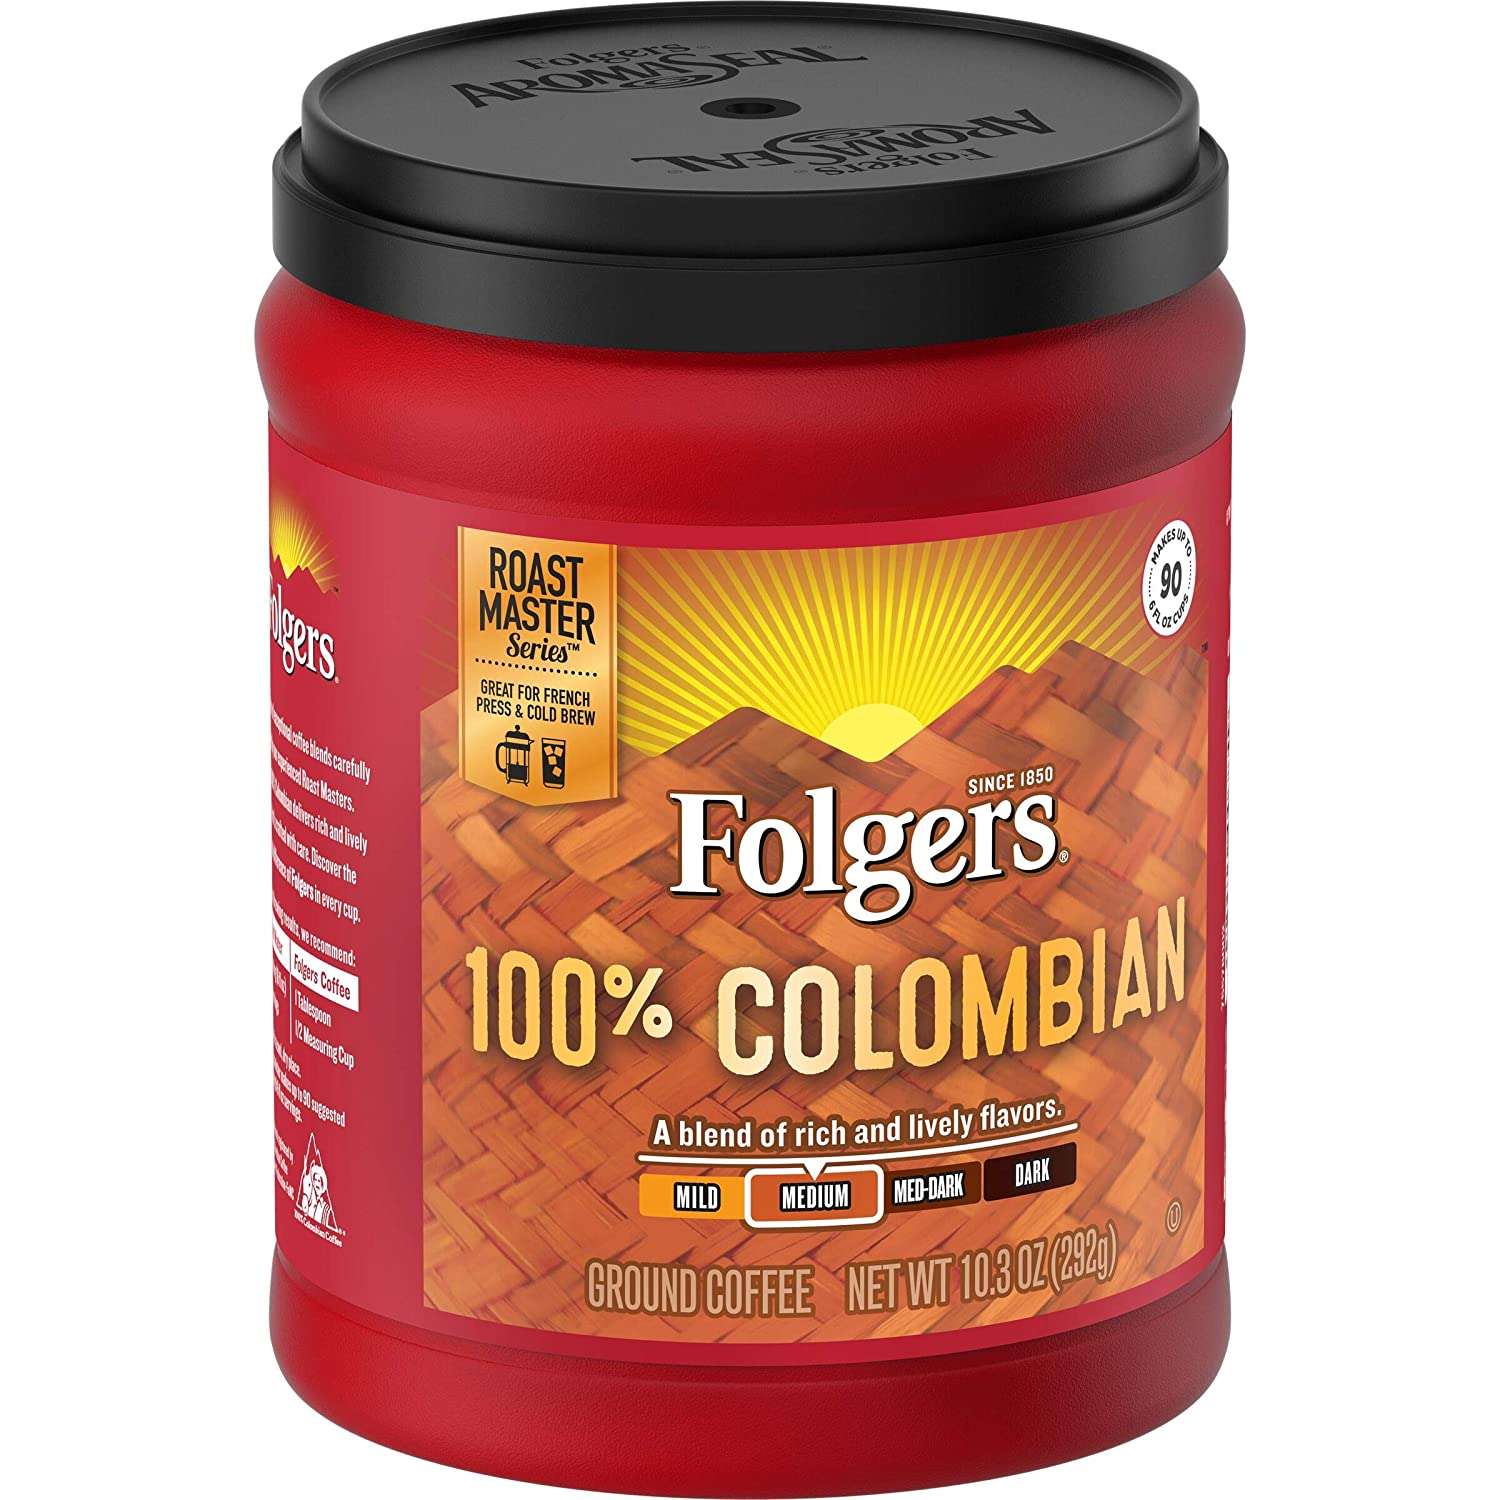 Folgers Colombian Coffee Review